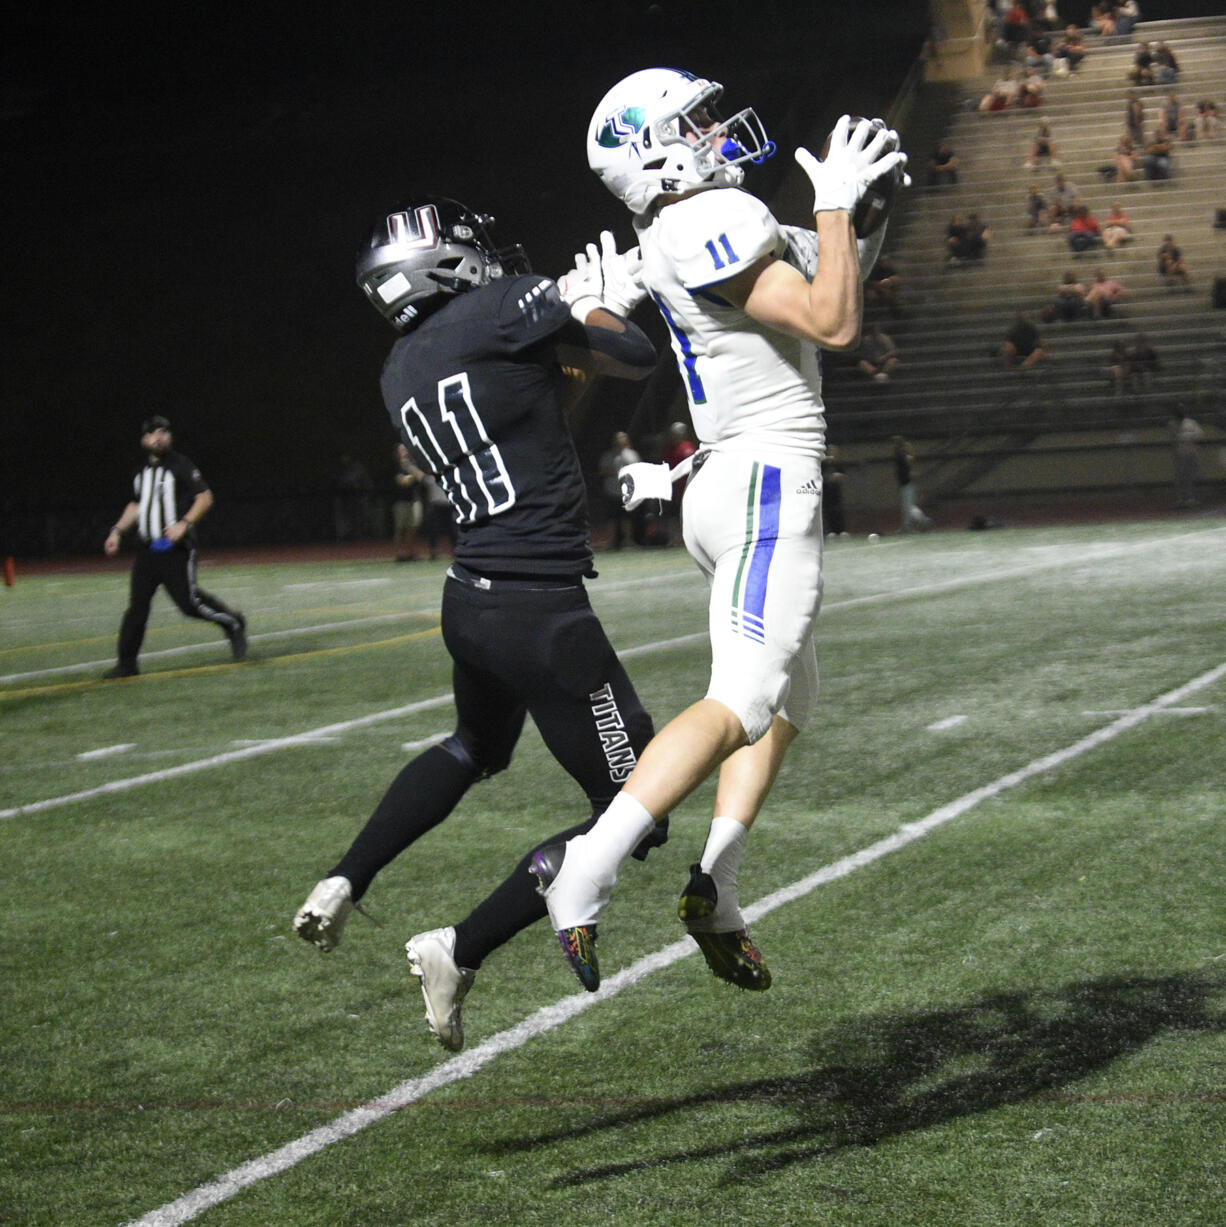 Mountain View’s Aiden Nicholson (11) makes a catch in front of Union’s Jordan Warren during Mountain View’s 42-27 wi over Union at McKenzie Stadium on Friday, Sept. 15, 2023.